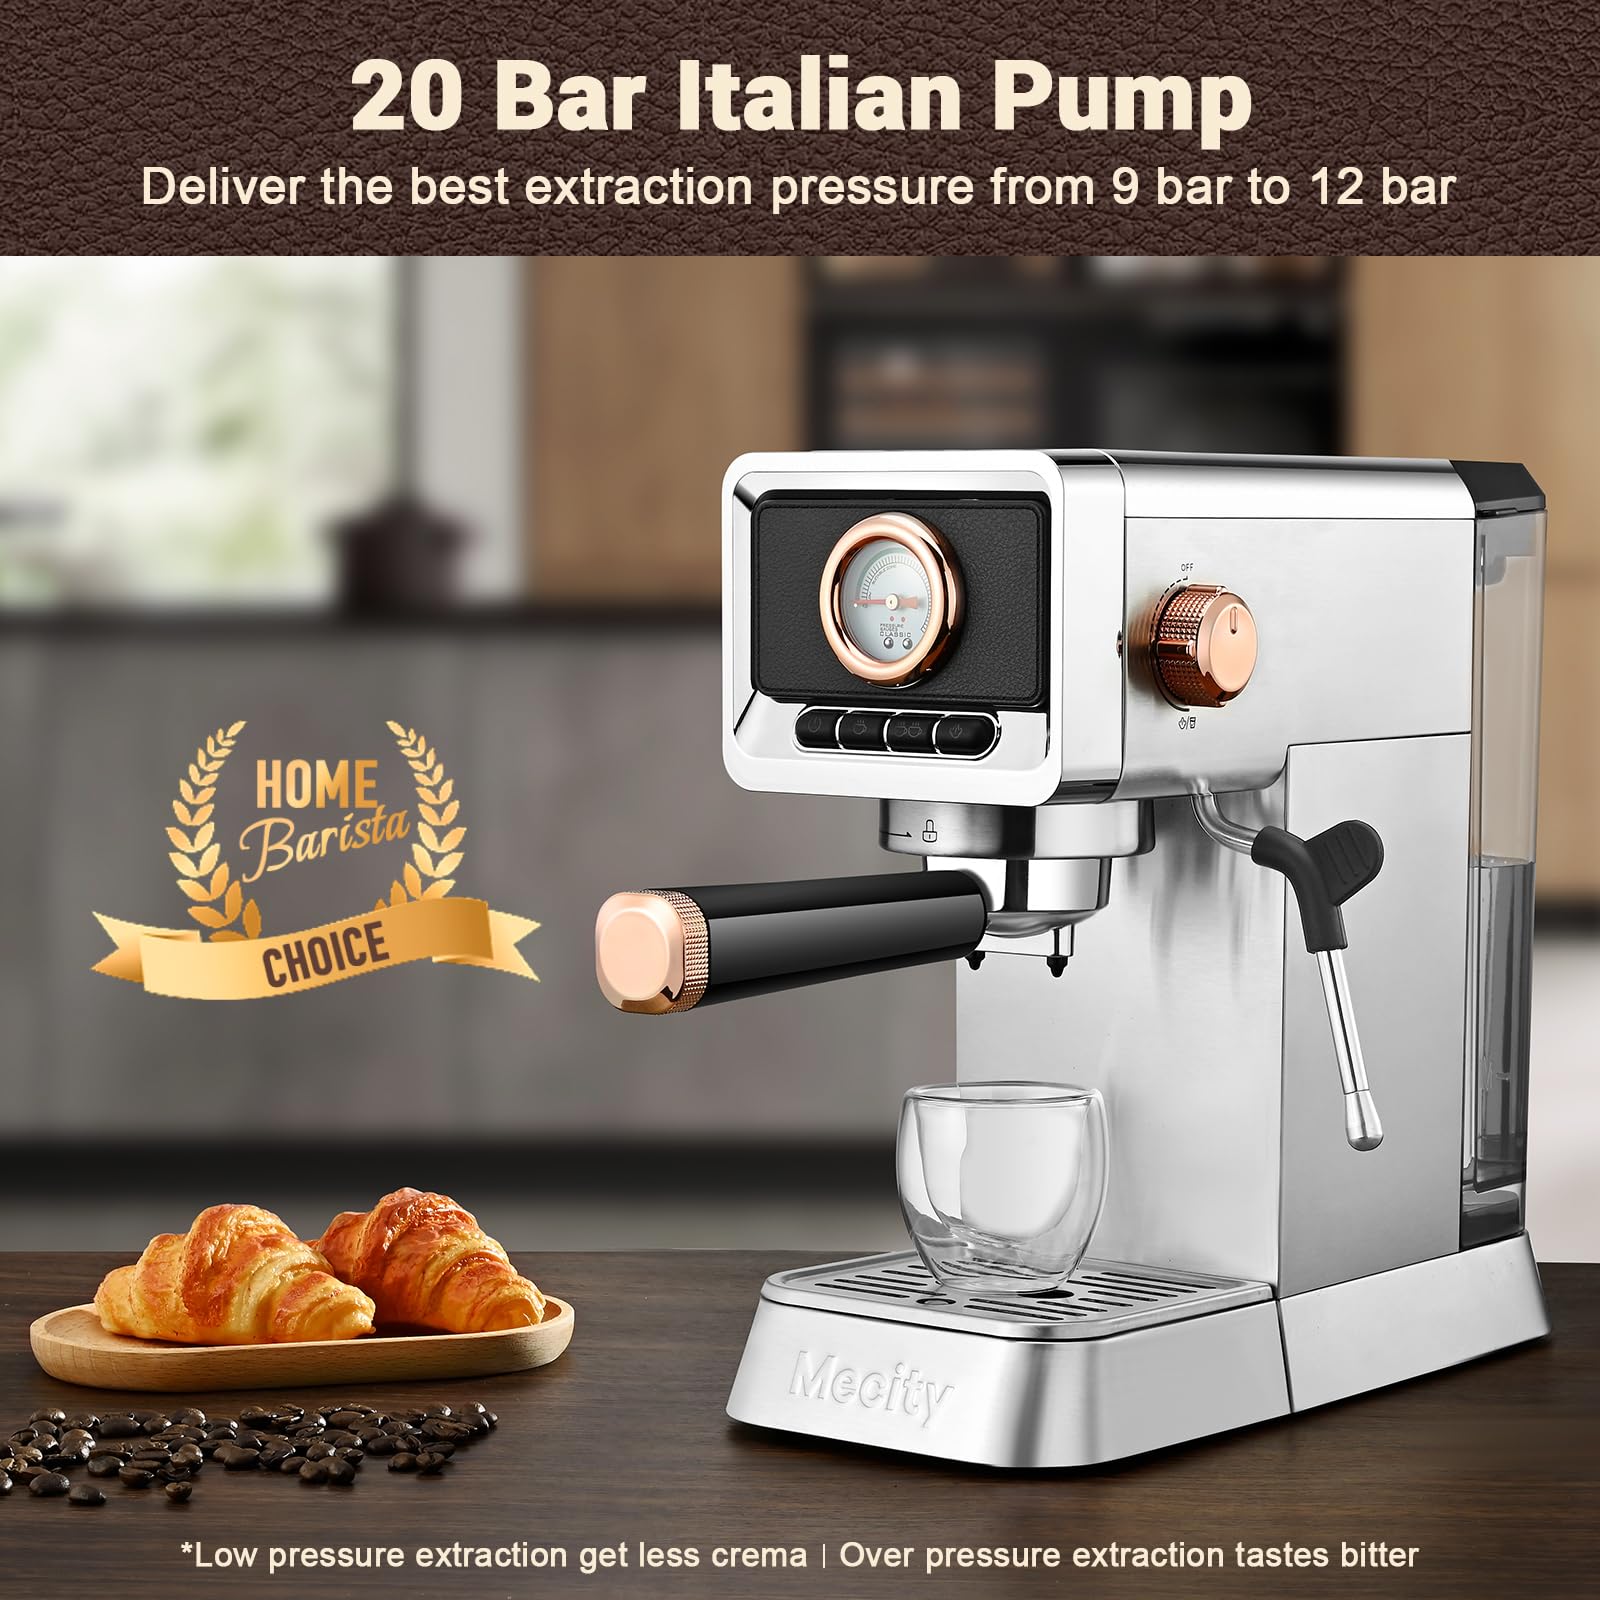 Mecity 20 Bar Espresso Machine with Milk Frother, Brushed Stainless Steel Shell, 37 fl.Oz Water Reservoir, Coffee Maker For Espresso, Latte, Mocha, Americano. 1400W